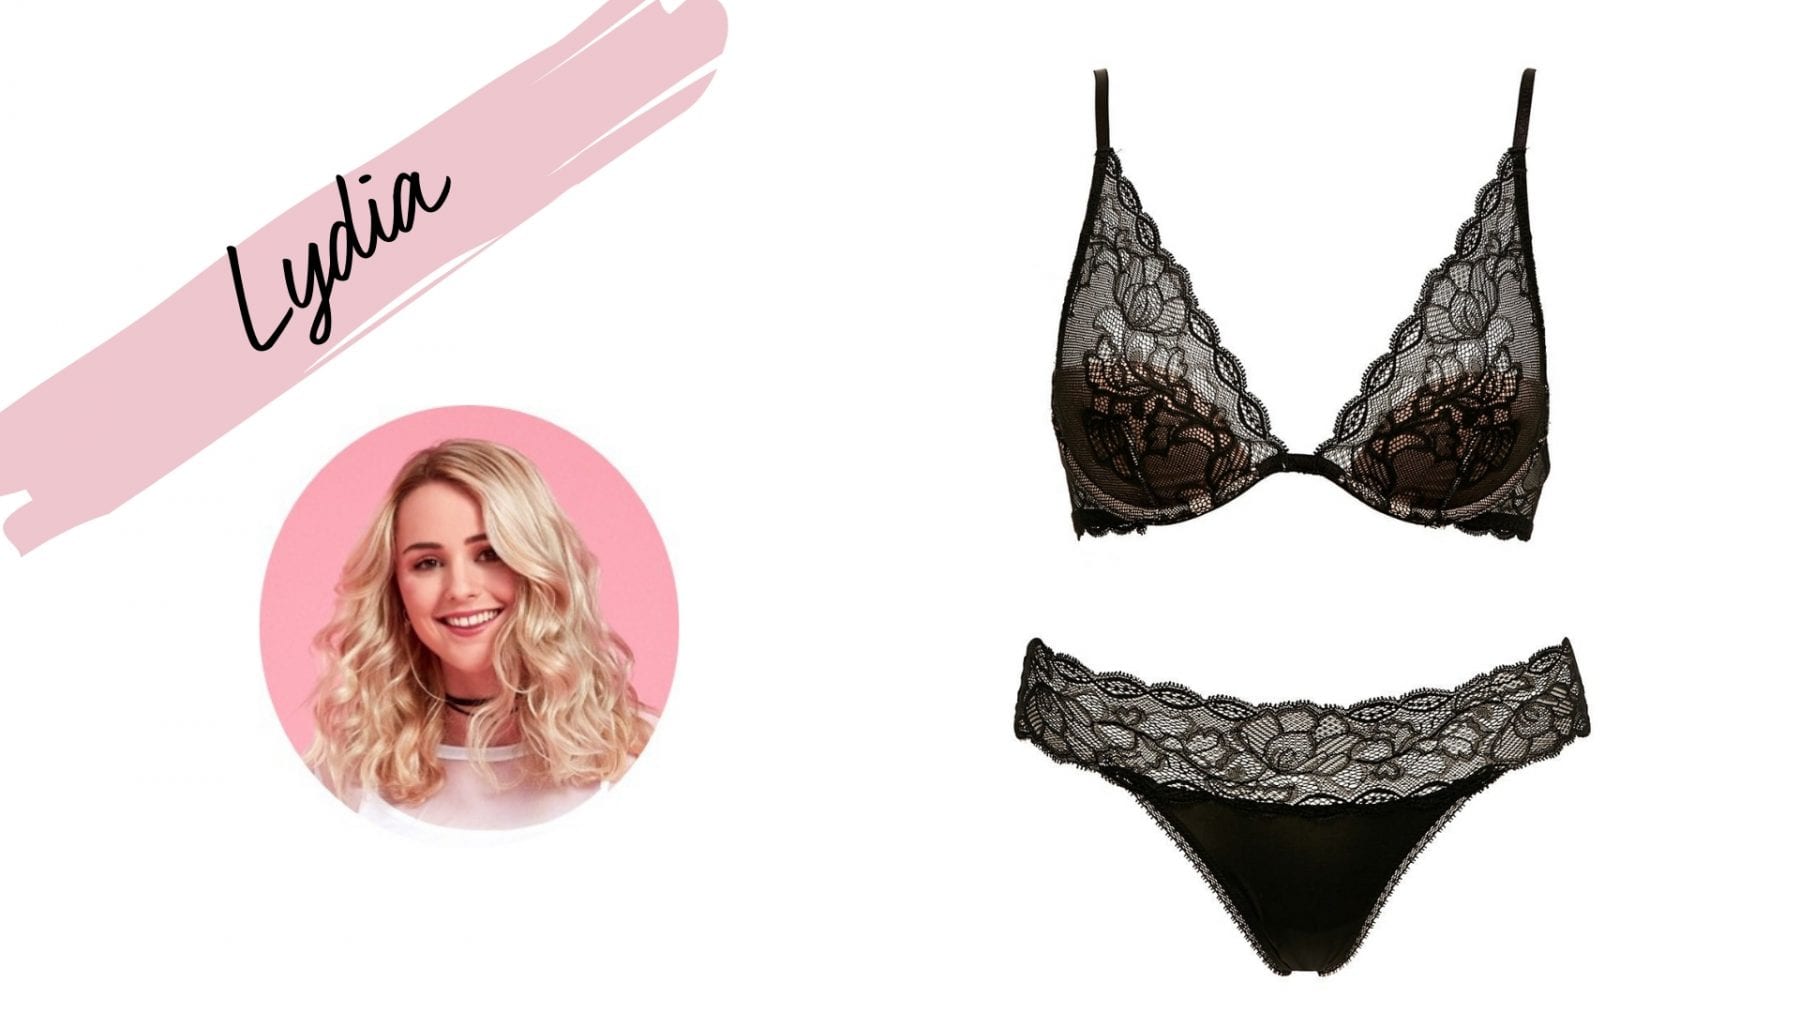 How To Choose A Lingerie That's Both Sexy and Comfortable